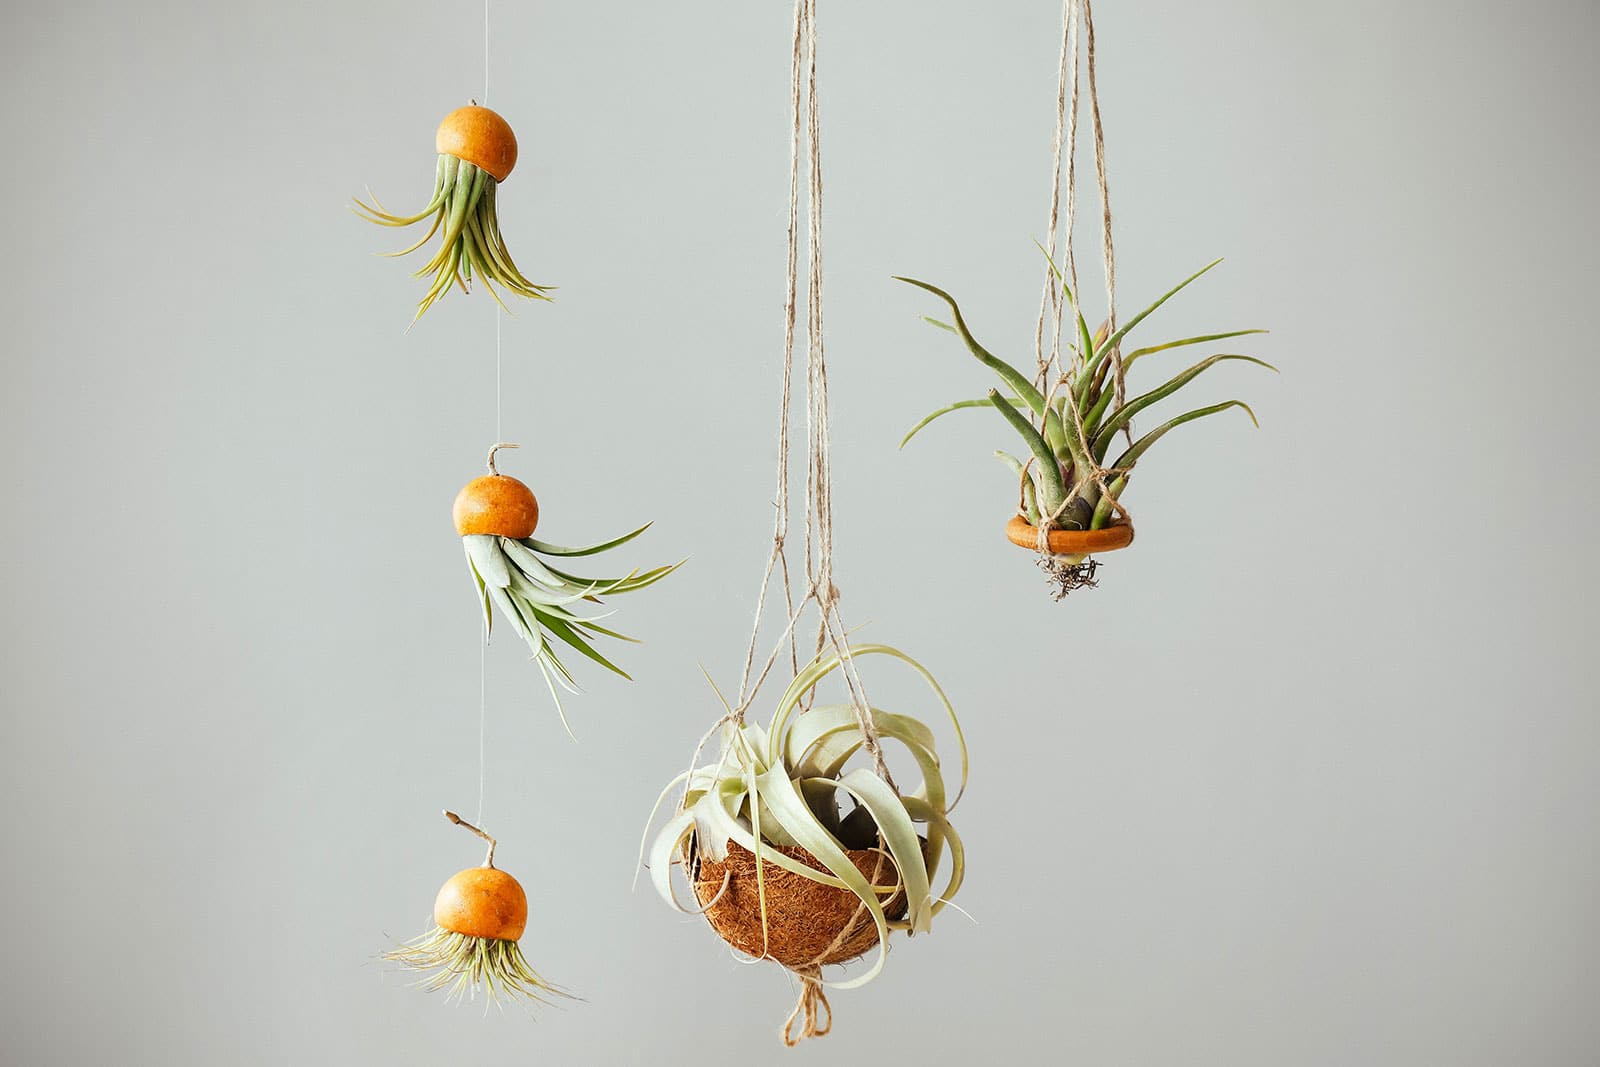 Five different types of air plants hung from the ceiling in various creative arrangements with twine and fishing line